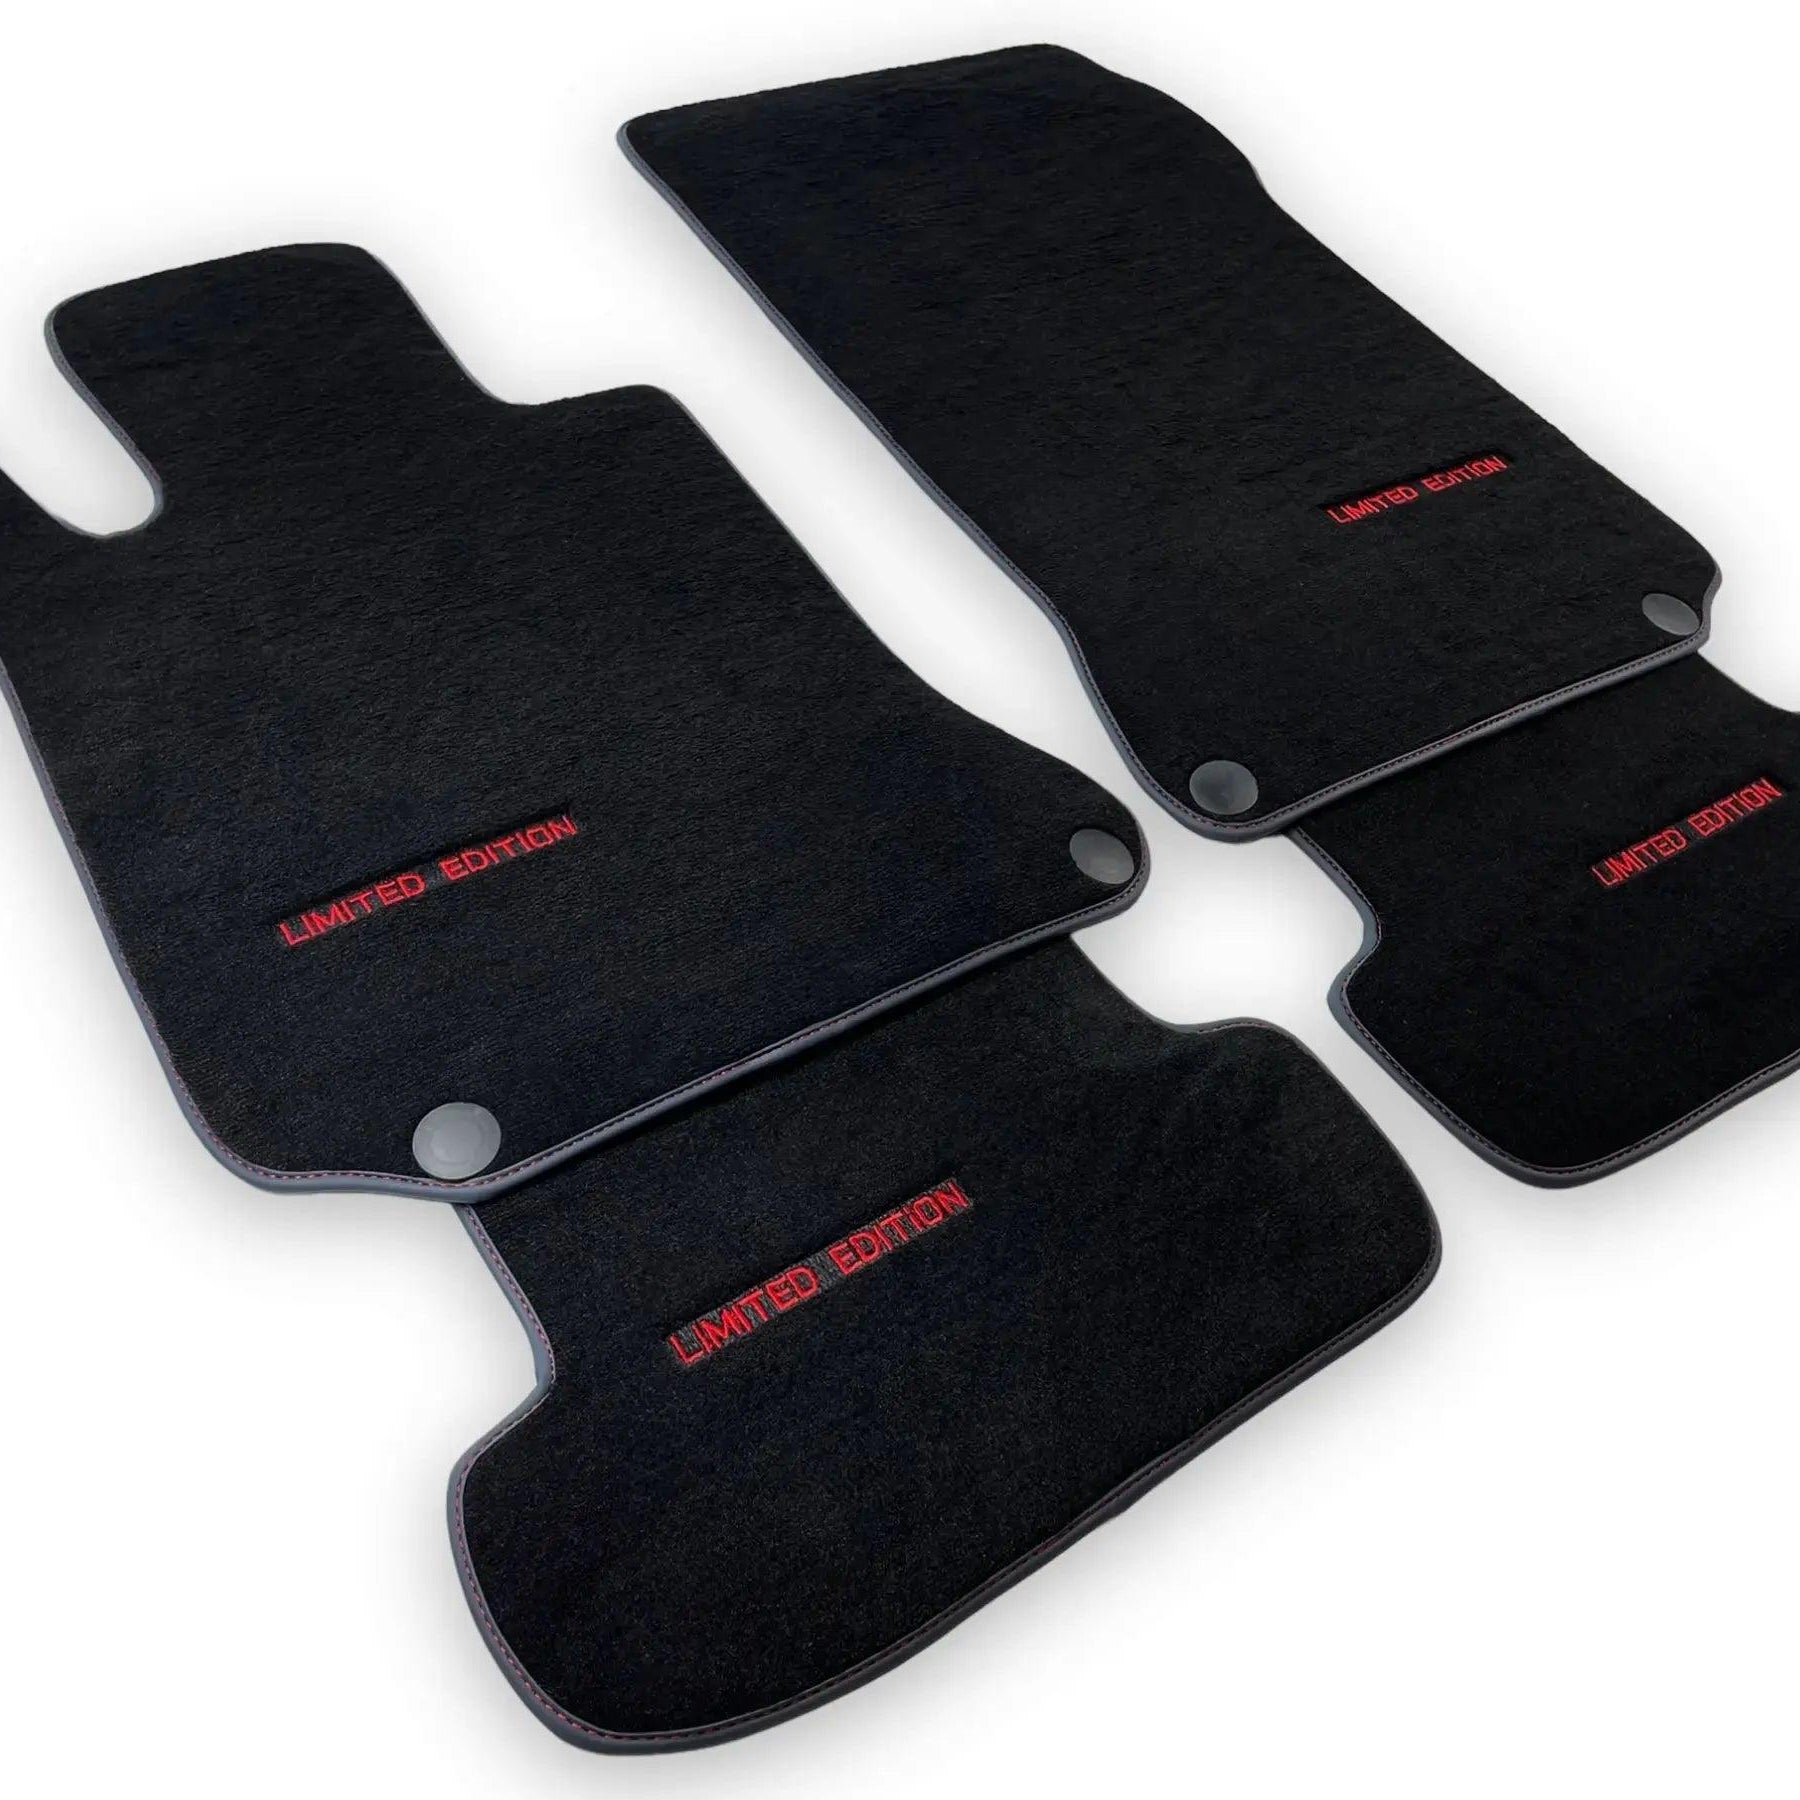 Black Floor Mats For Mercedes Benz E-Class C207 Coupe Facelift (2013-2017) | Limited Edition